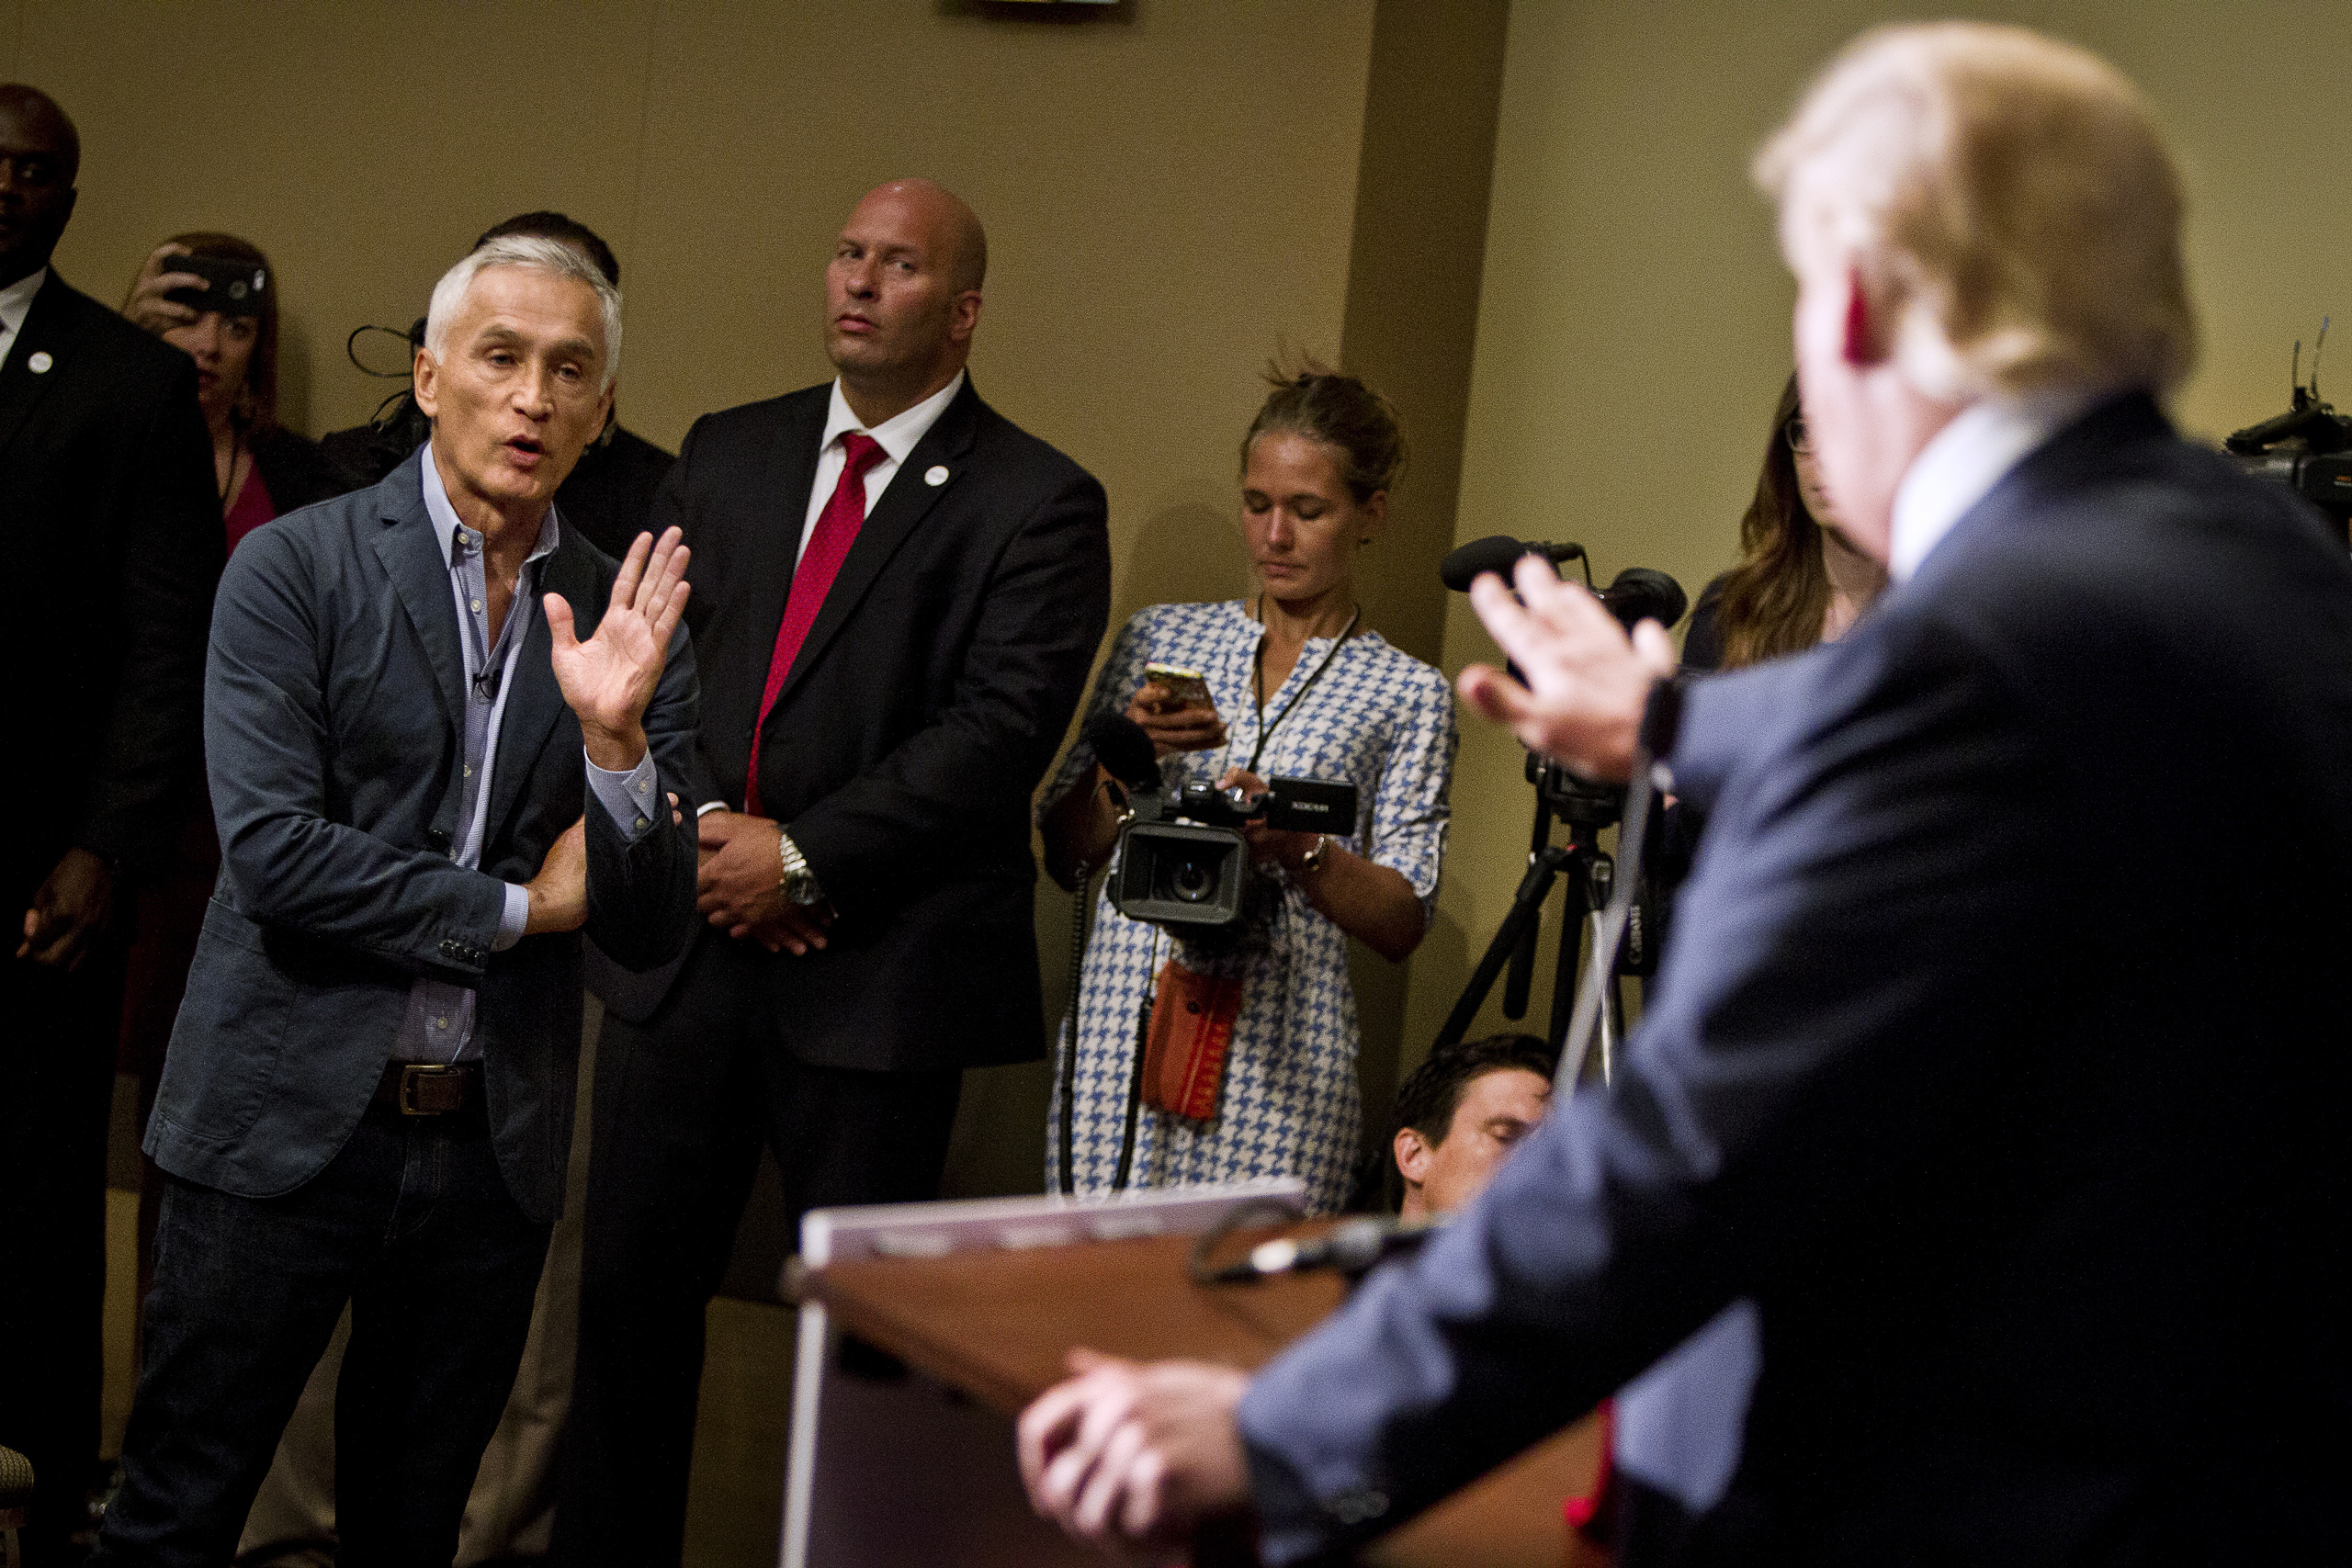 Jorge Ramos spars with then-Presidential candidate Donald Trump before his "Make America Great Again Rally" at the Grand River Center in Dubuque, Iowa, on Aug. 25, 2015. (Ben Brewer—Reuters&mdash;REUTERS)